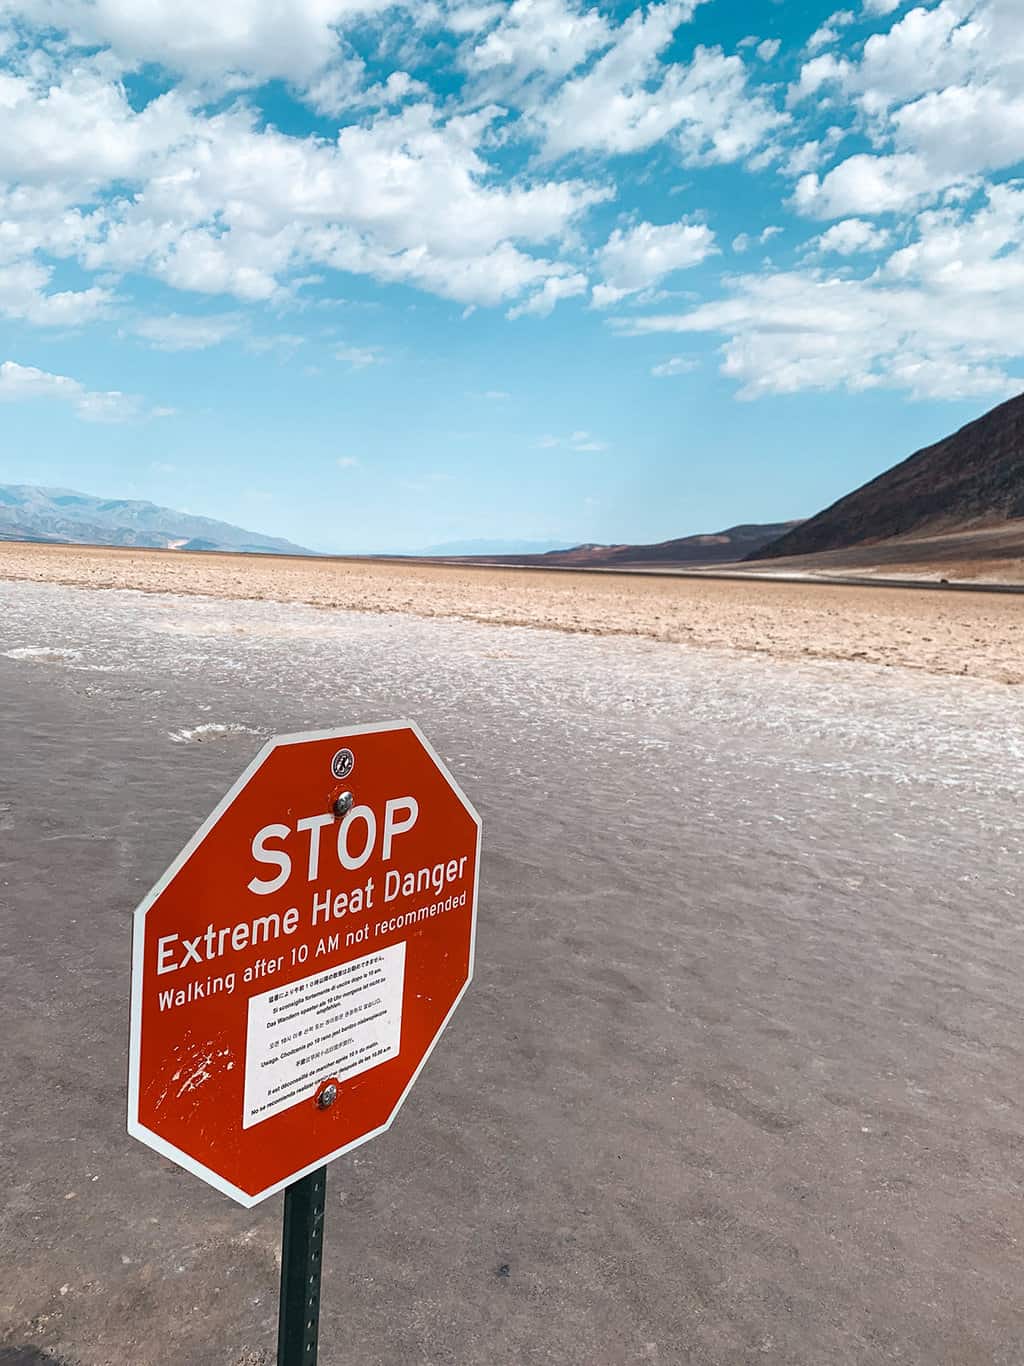 Badwater Basin in Death Valley National Park California